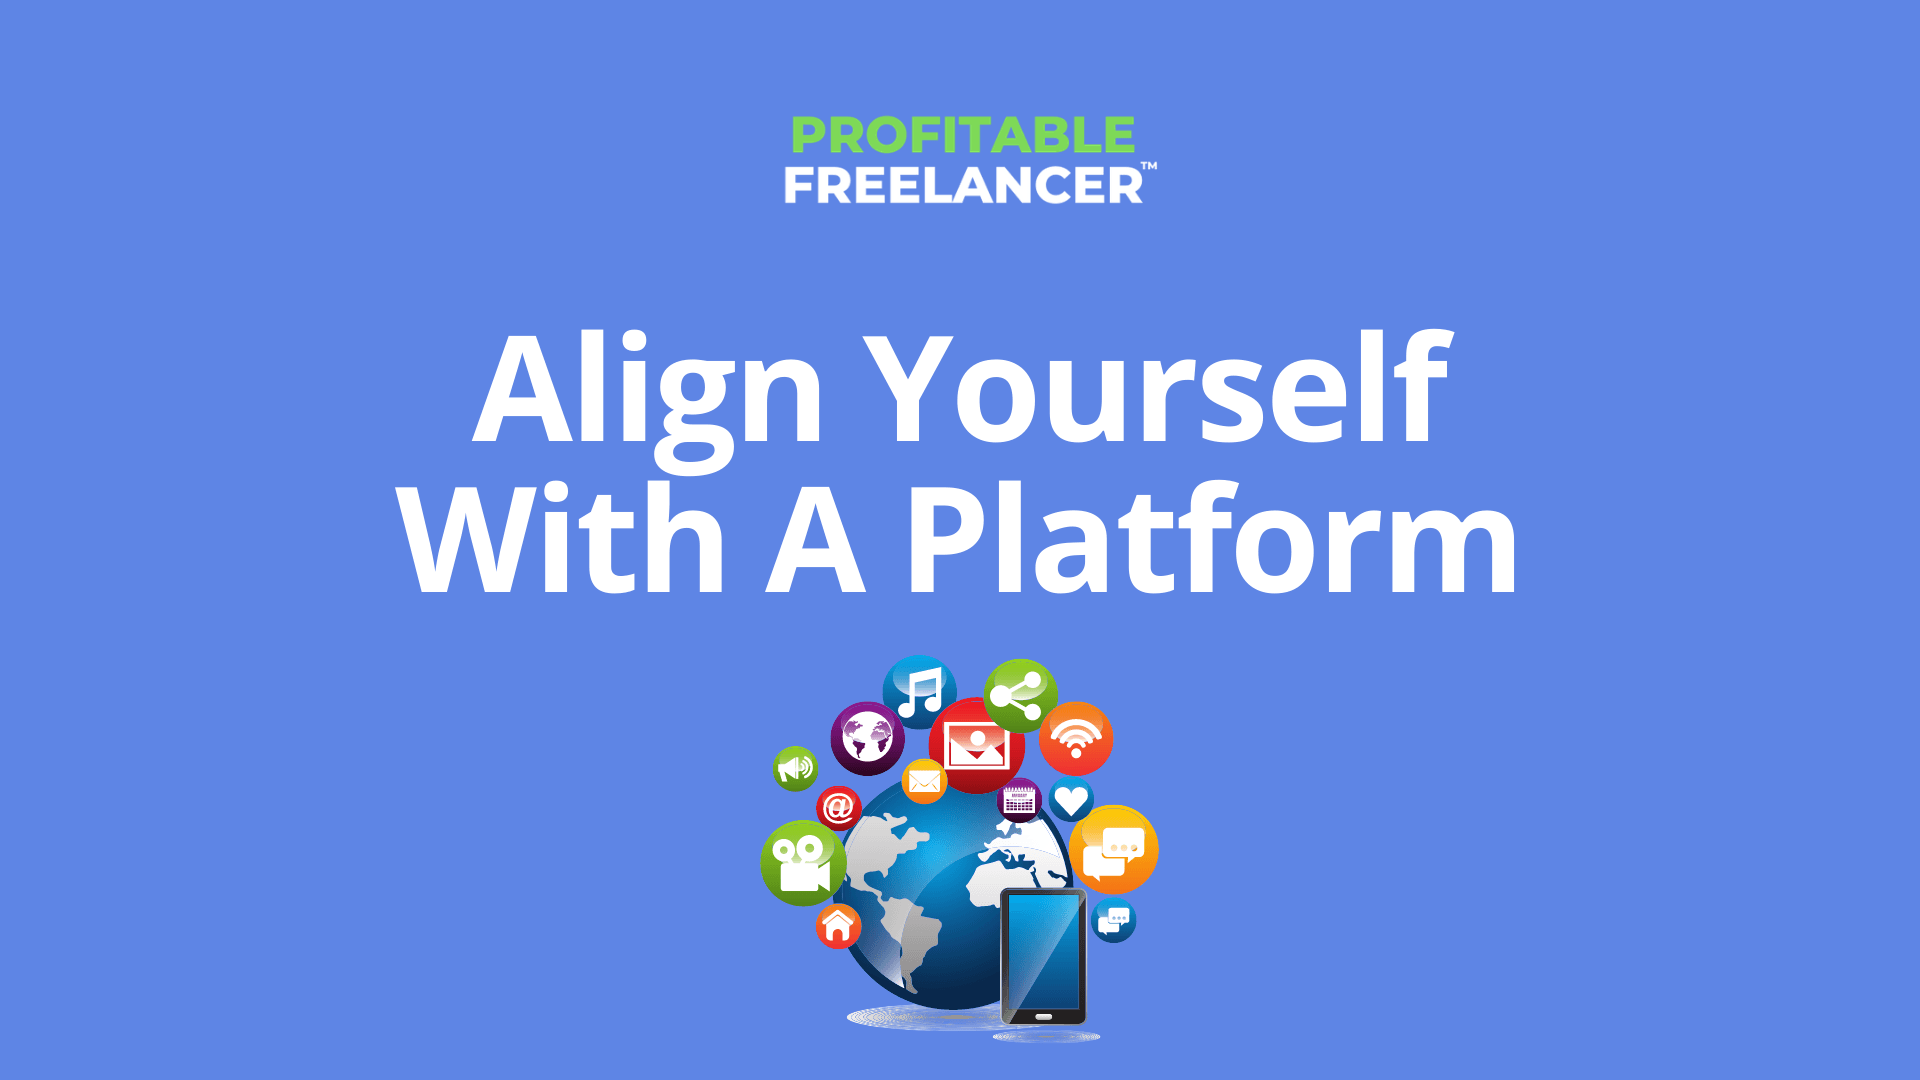 How to align yourself with a platform as a freelancer